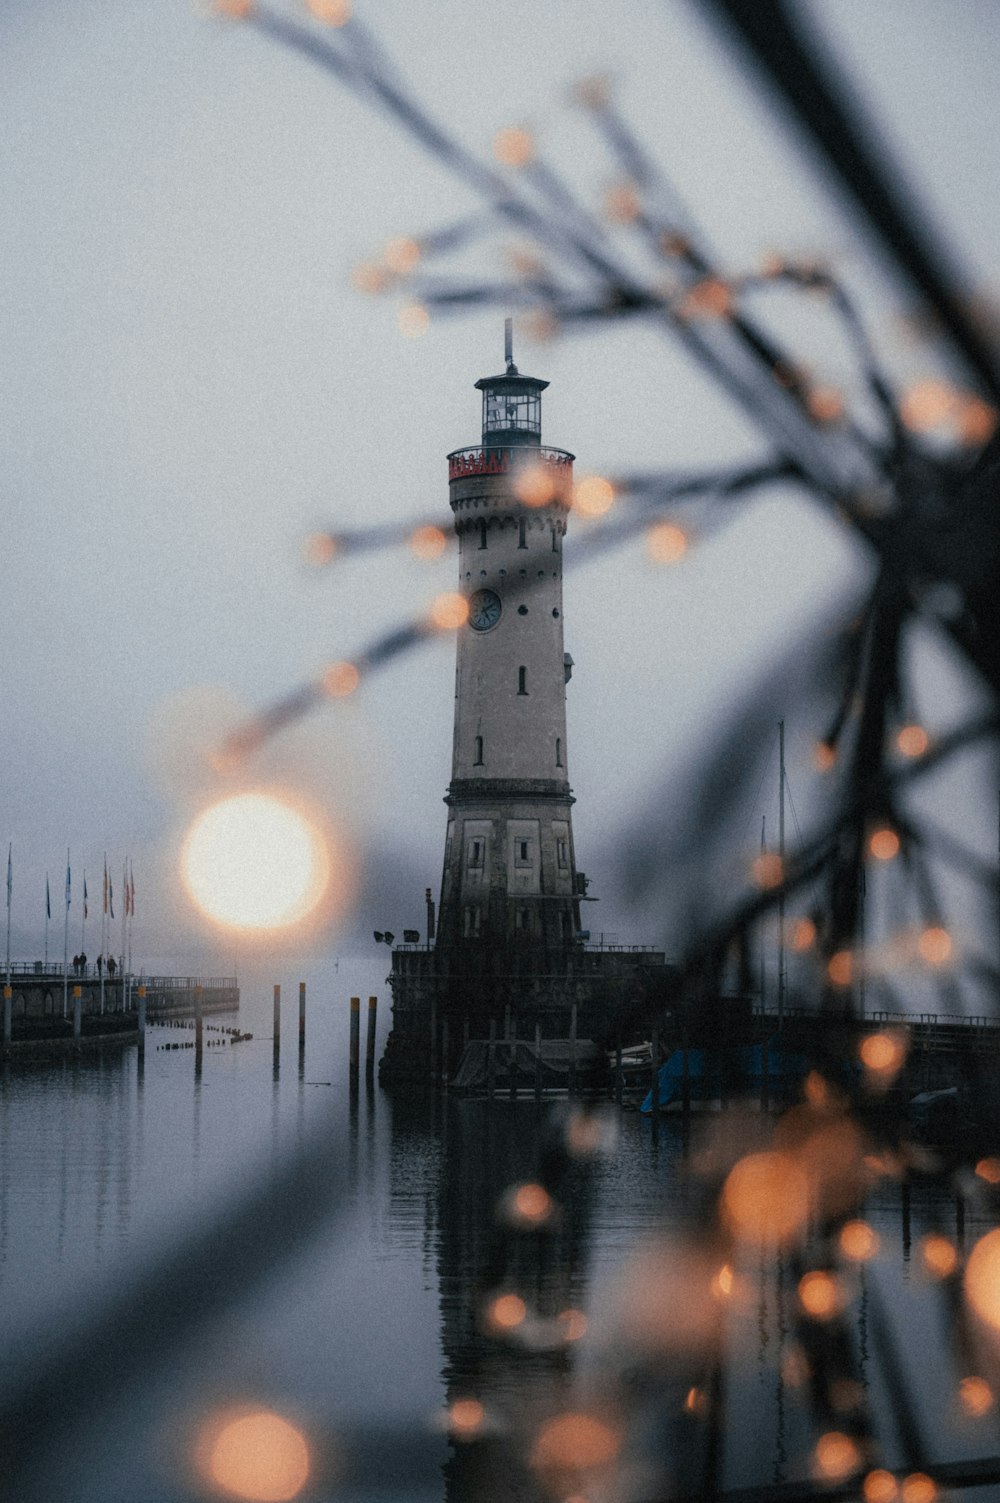 a light house sitting on top of a body of water